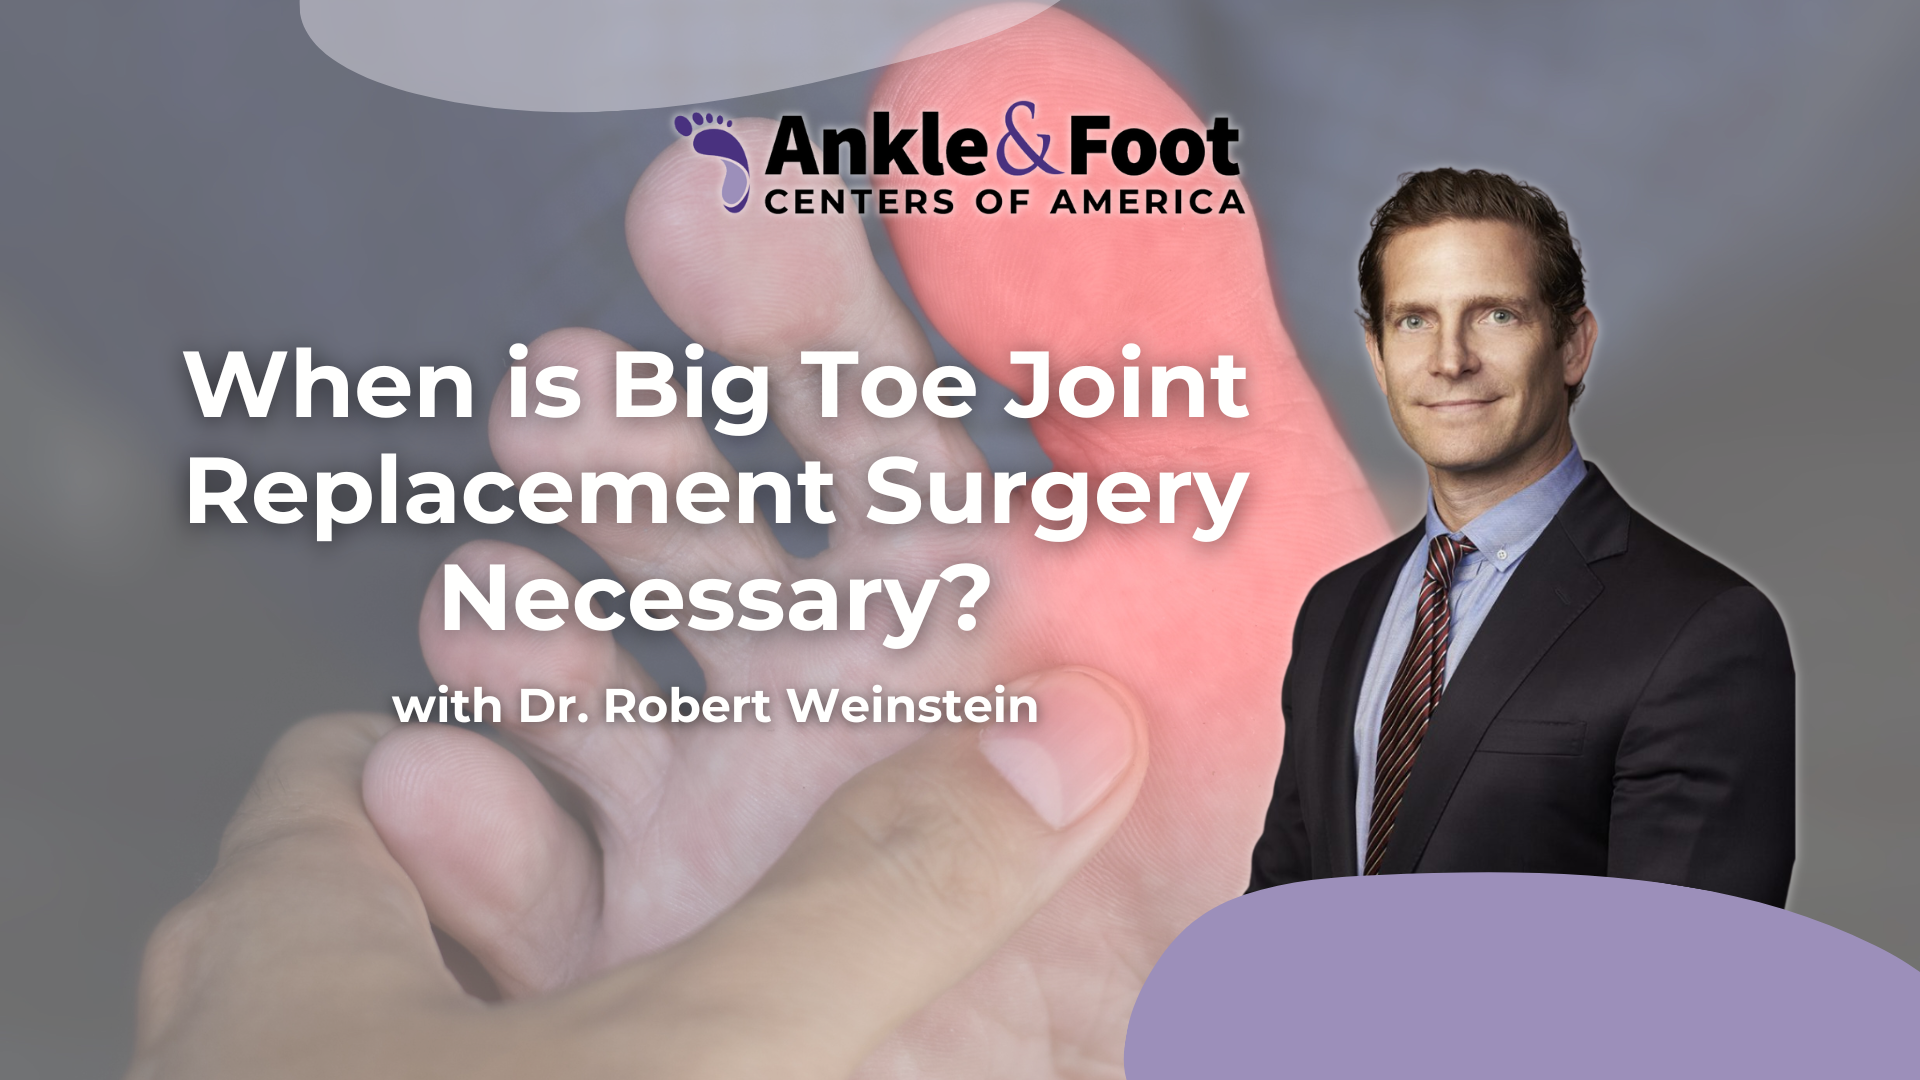 Big Toe Joint Replacement